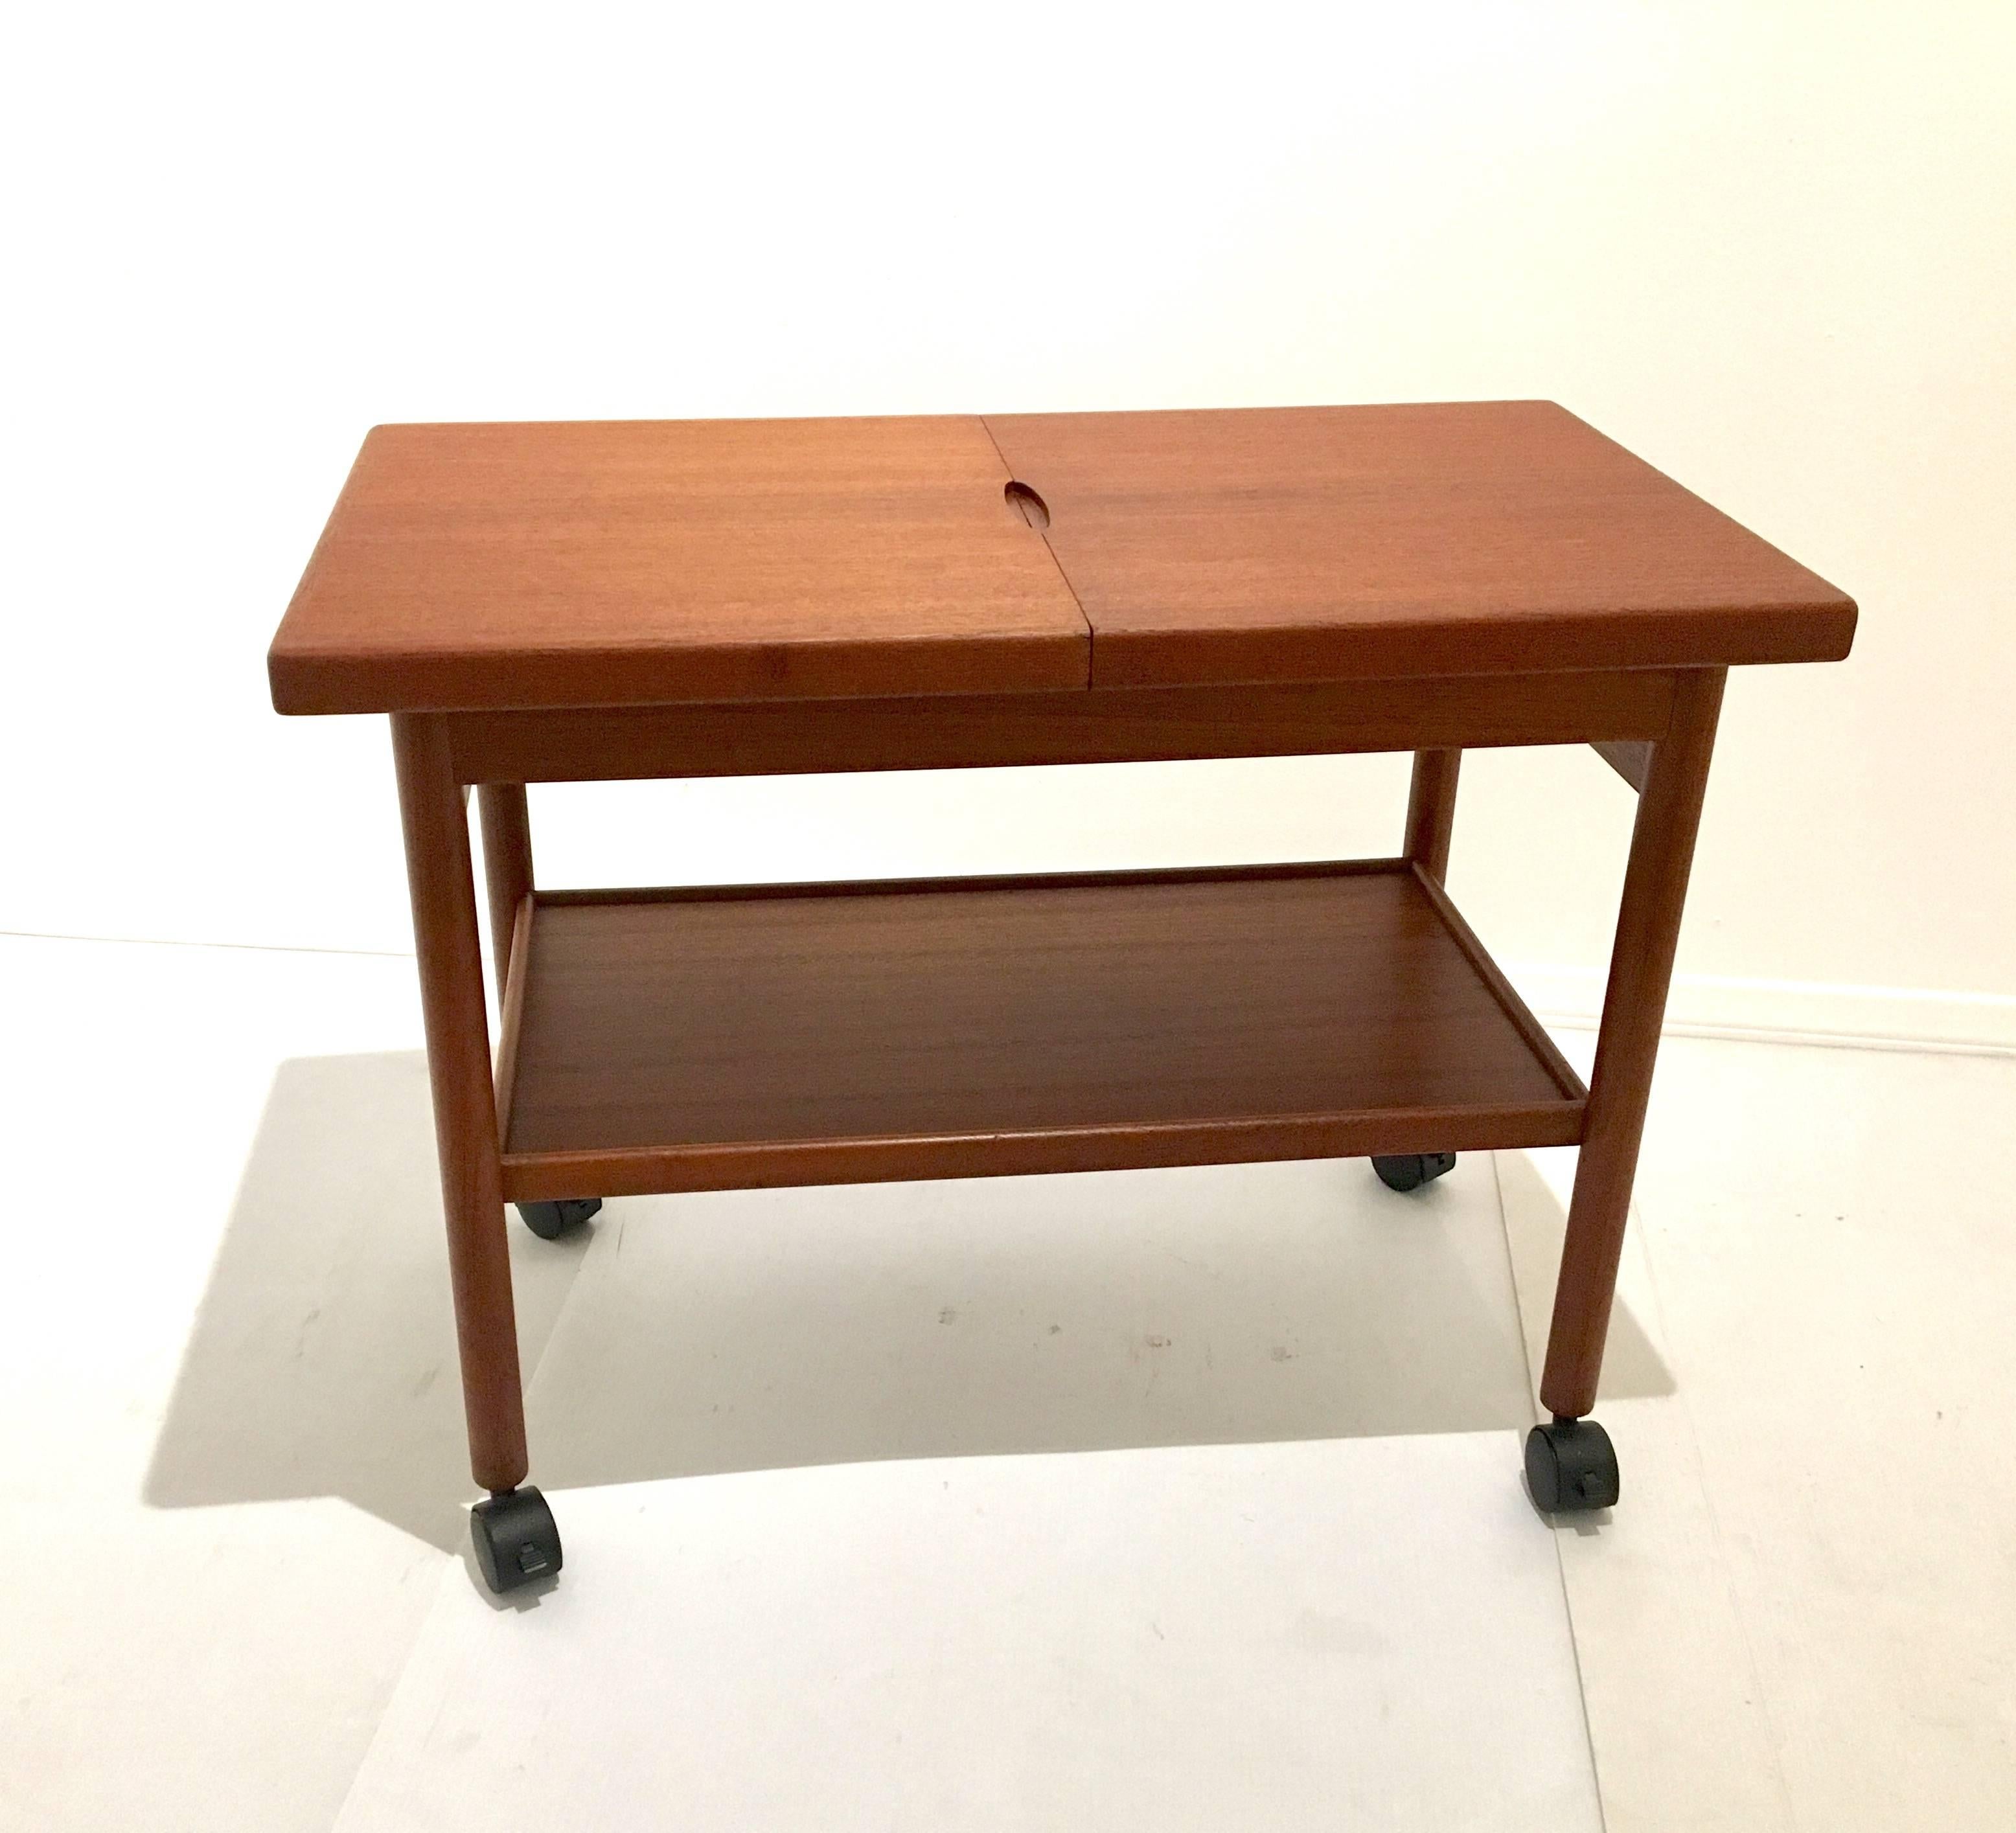 Versatile sliding top serving or bar cart designed by Kurt Ostervig. Top slides open to reveal black melamine top for placing beverages while protecting the teak wood top. A lower shelf for storage the cart has been refinished and each caster has a